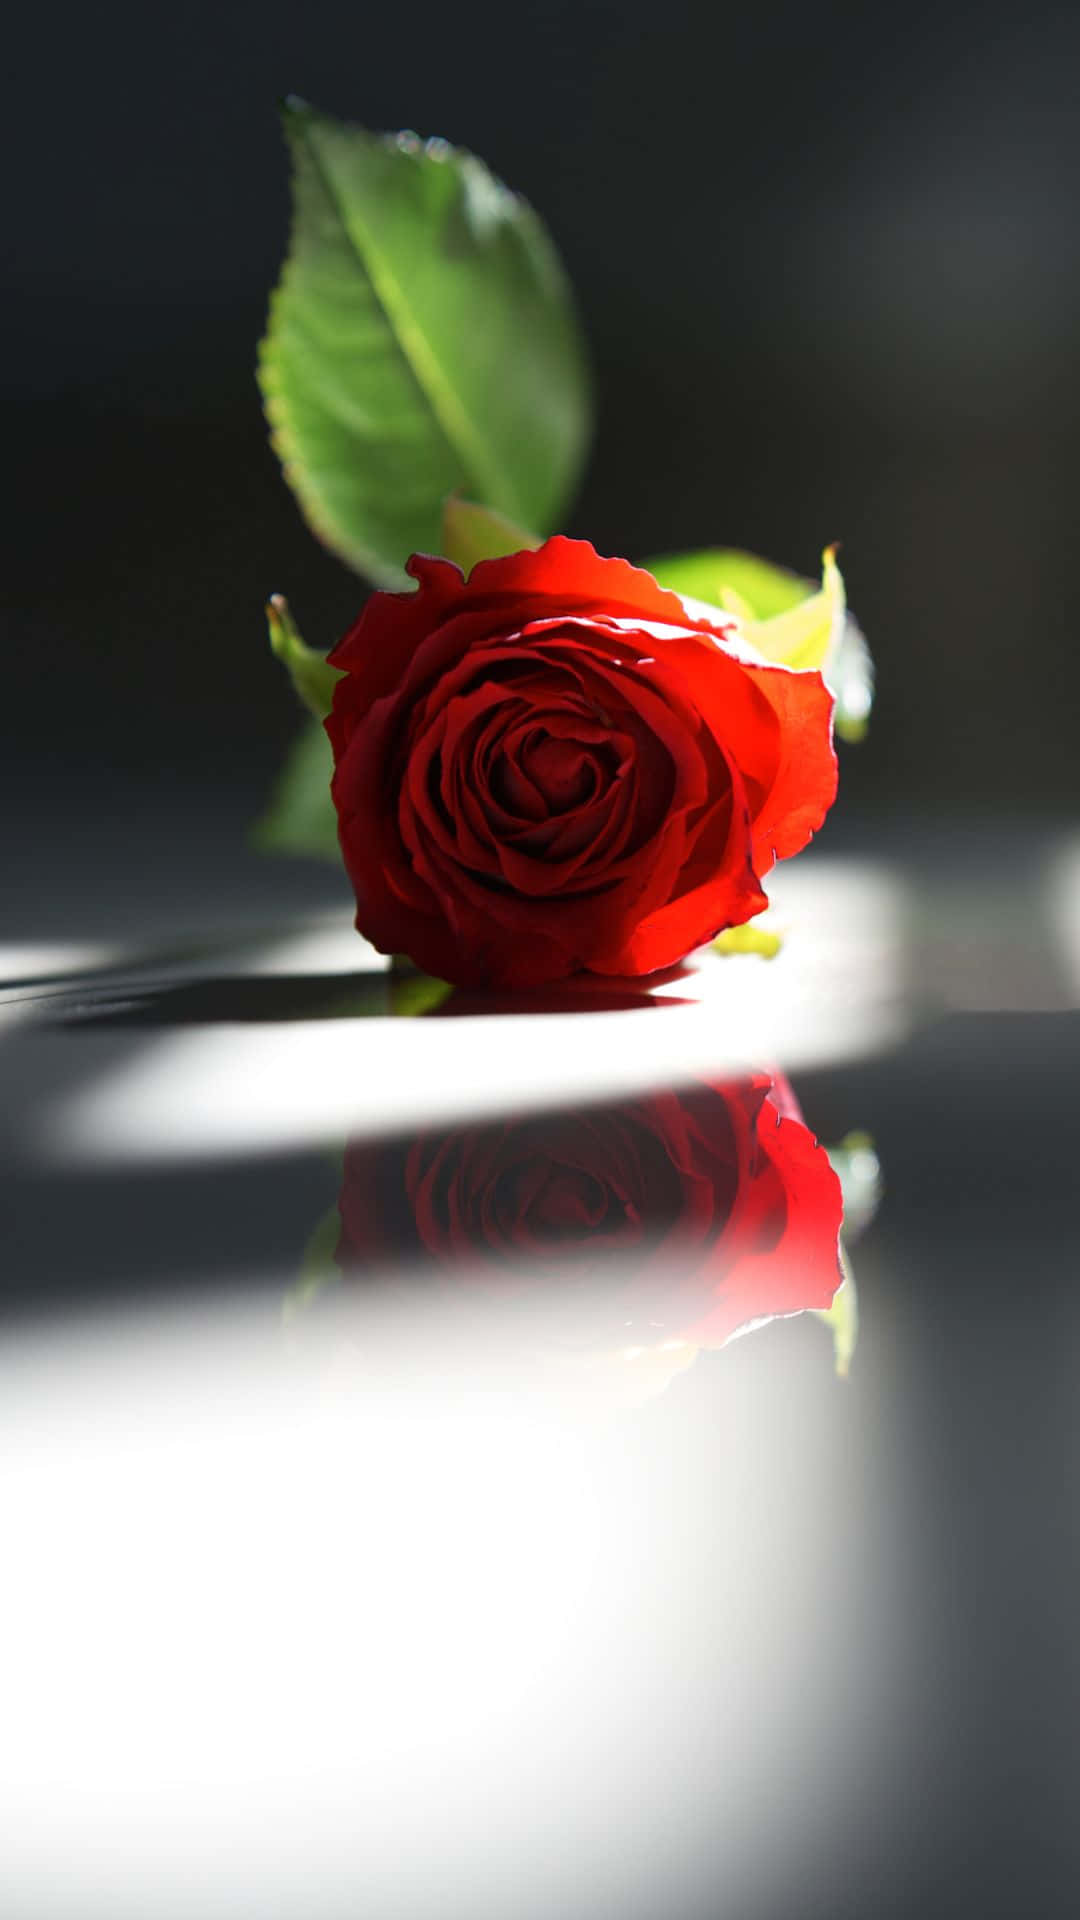 A Red Rose On A White Surface Wallpaper